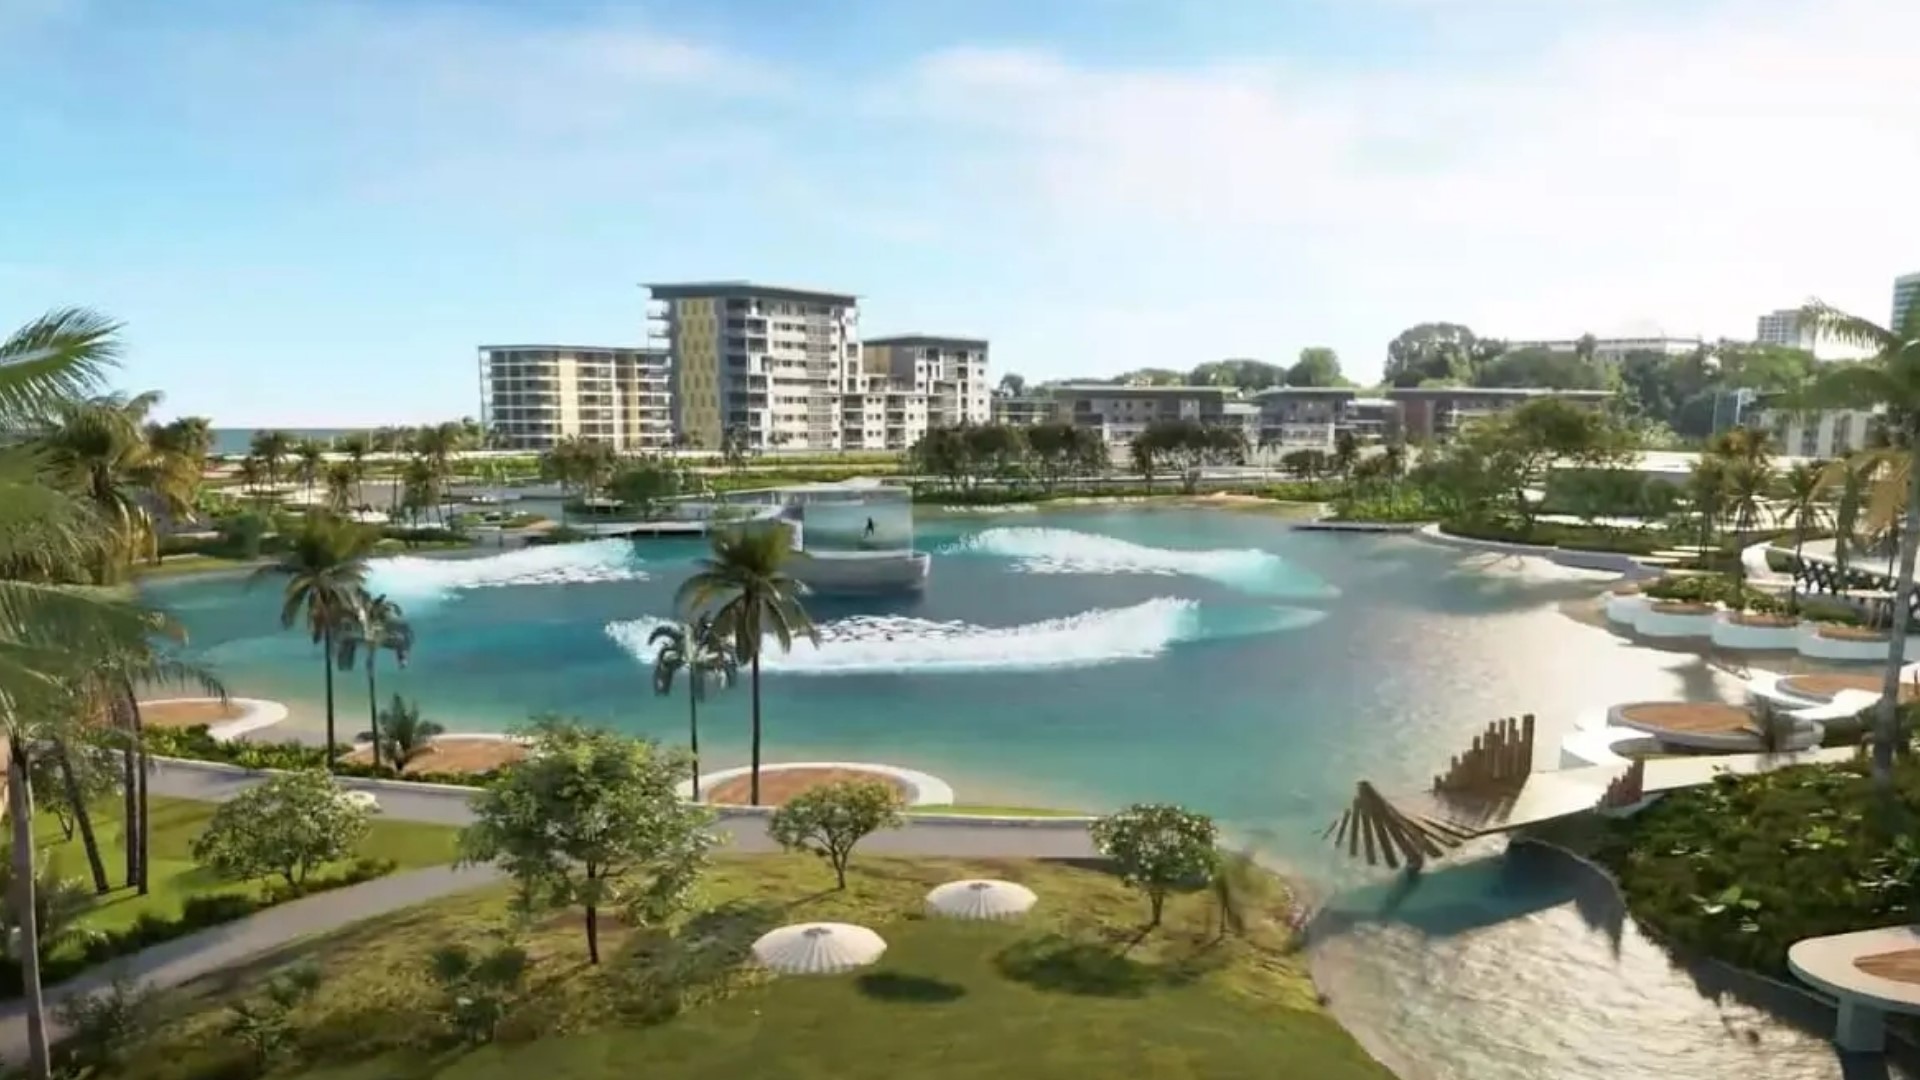 A 400-acre community called Pura Vida that features a 12-acre Surf Lake at its center could be built south of the airport as early as next year.